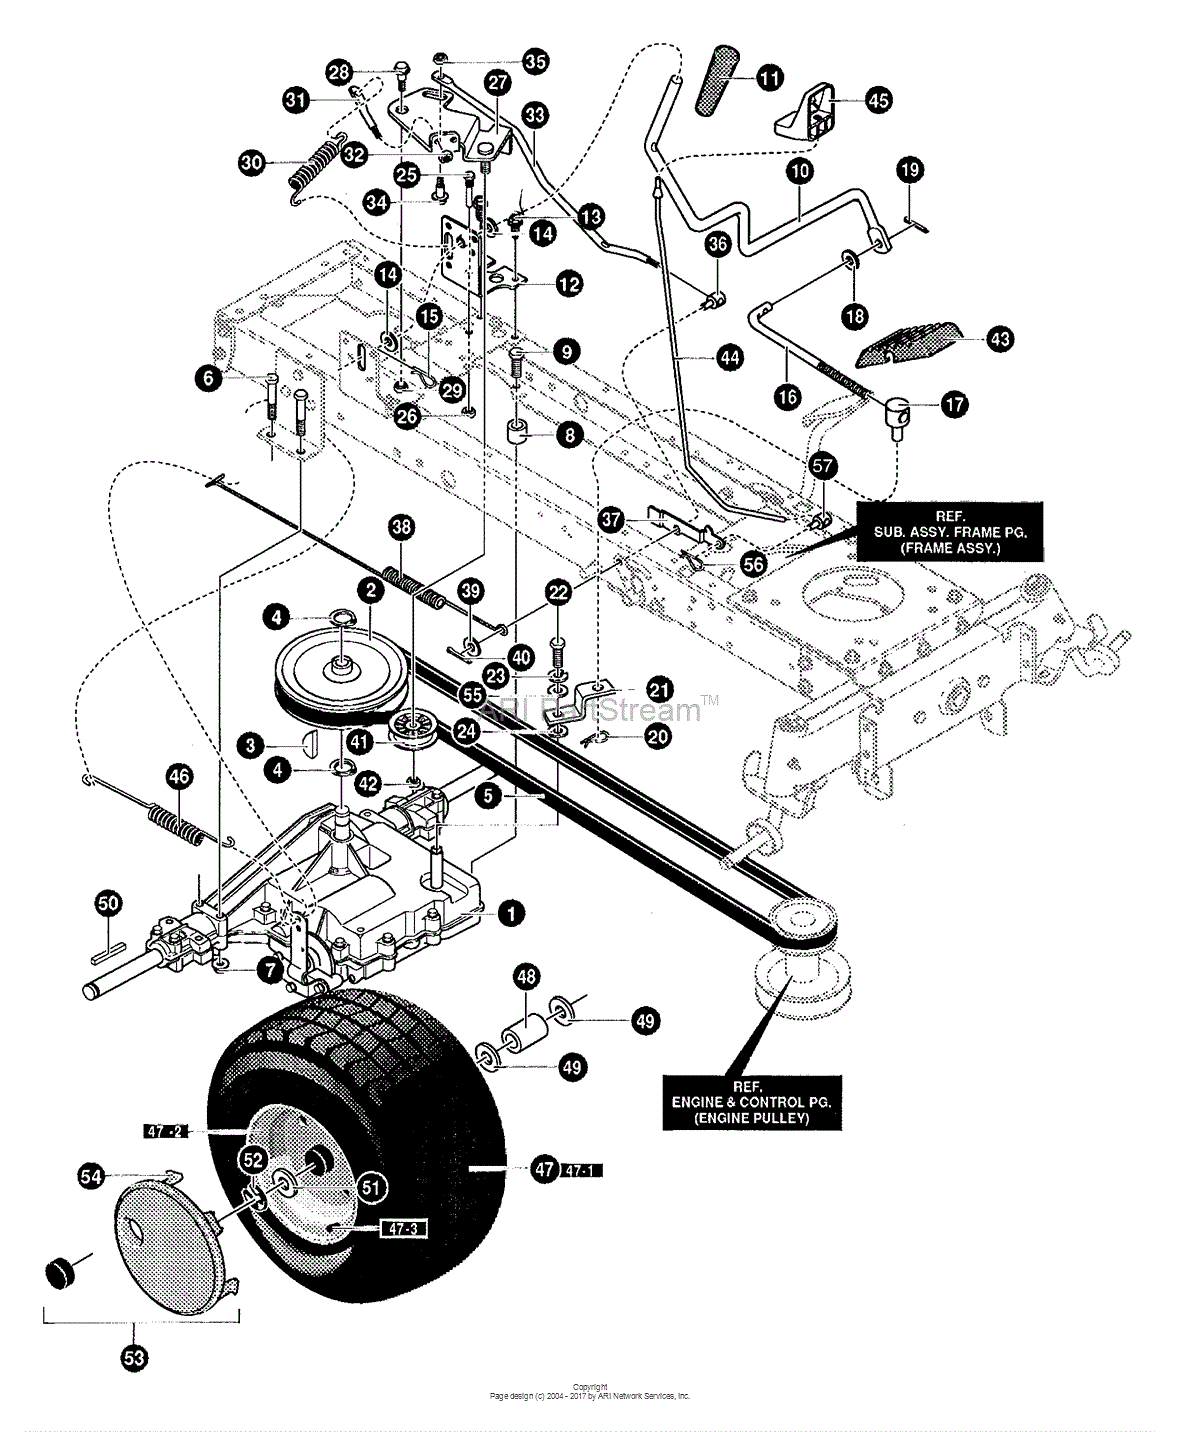 Murray 42531x8A - Lawn Tractor (1997) Parts Diagram for Motion Drive ...